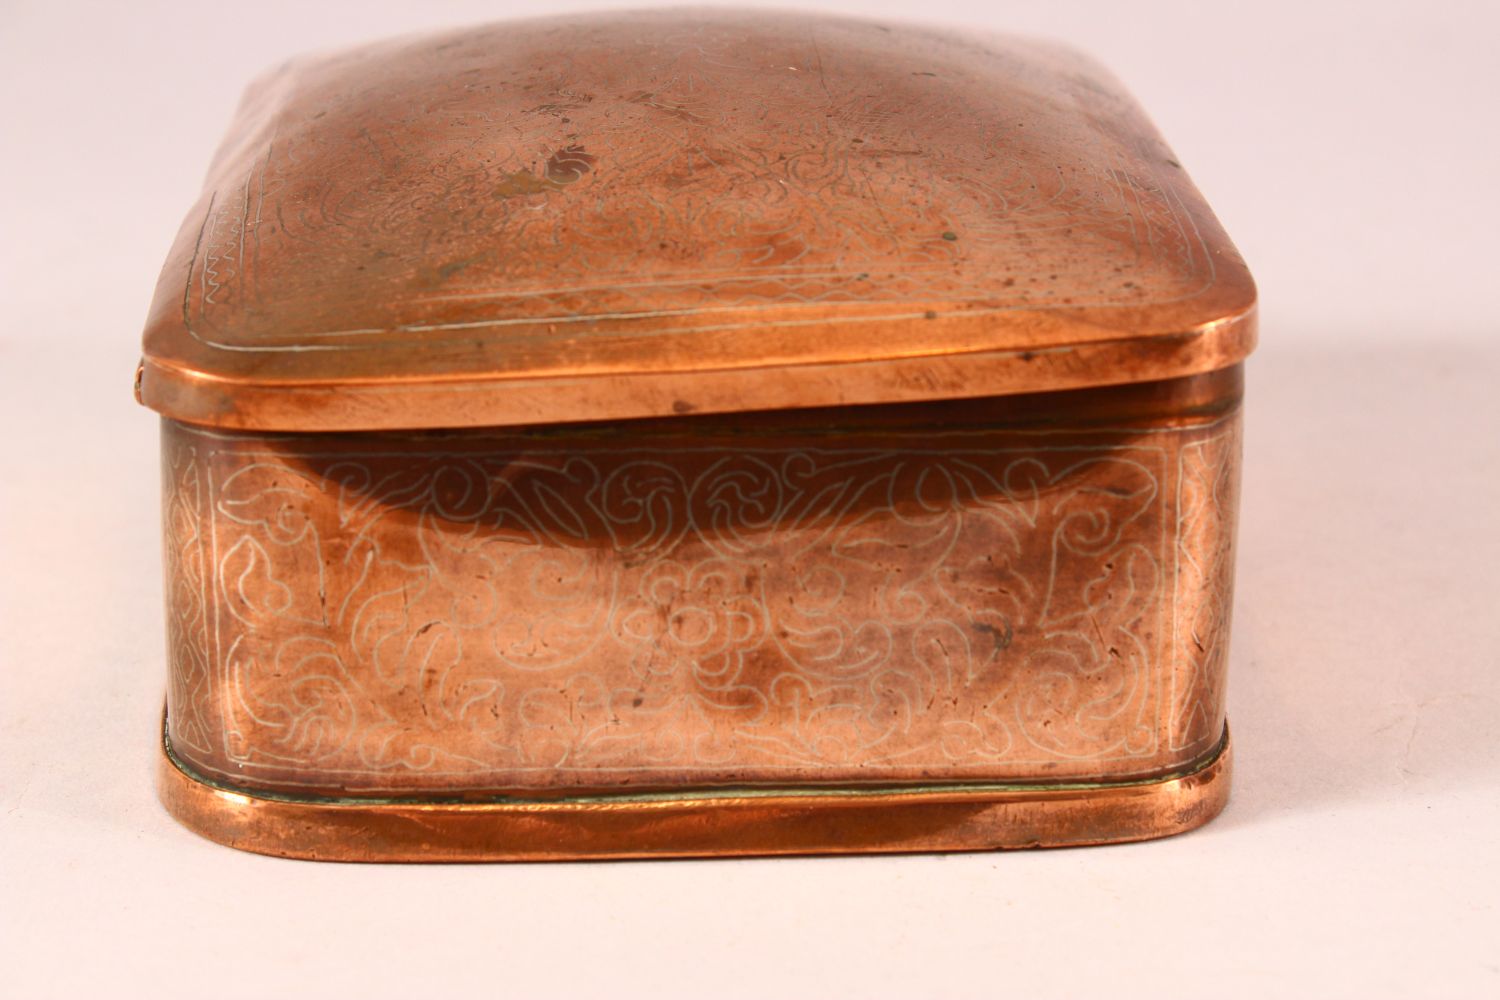 A FINE 19TH CENTURY SRI LANKAN OR BURMESE SILVER INLAID COPPER BOX - decorated with silver inlay - Image 4 of 7